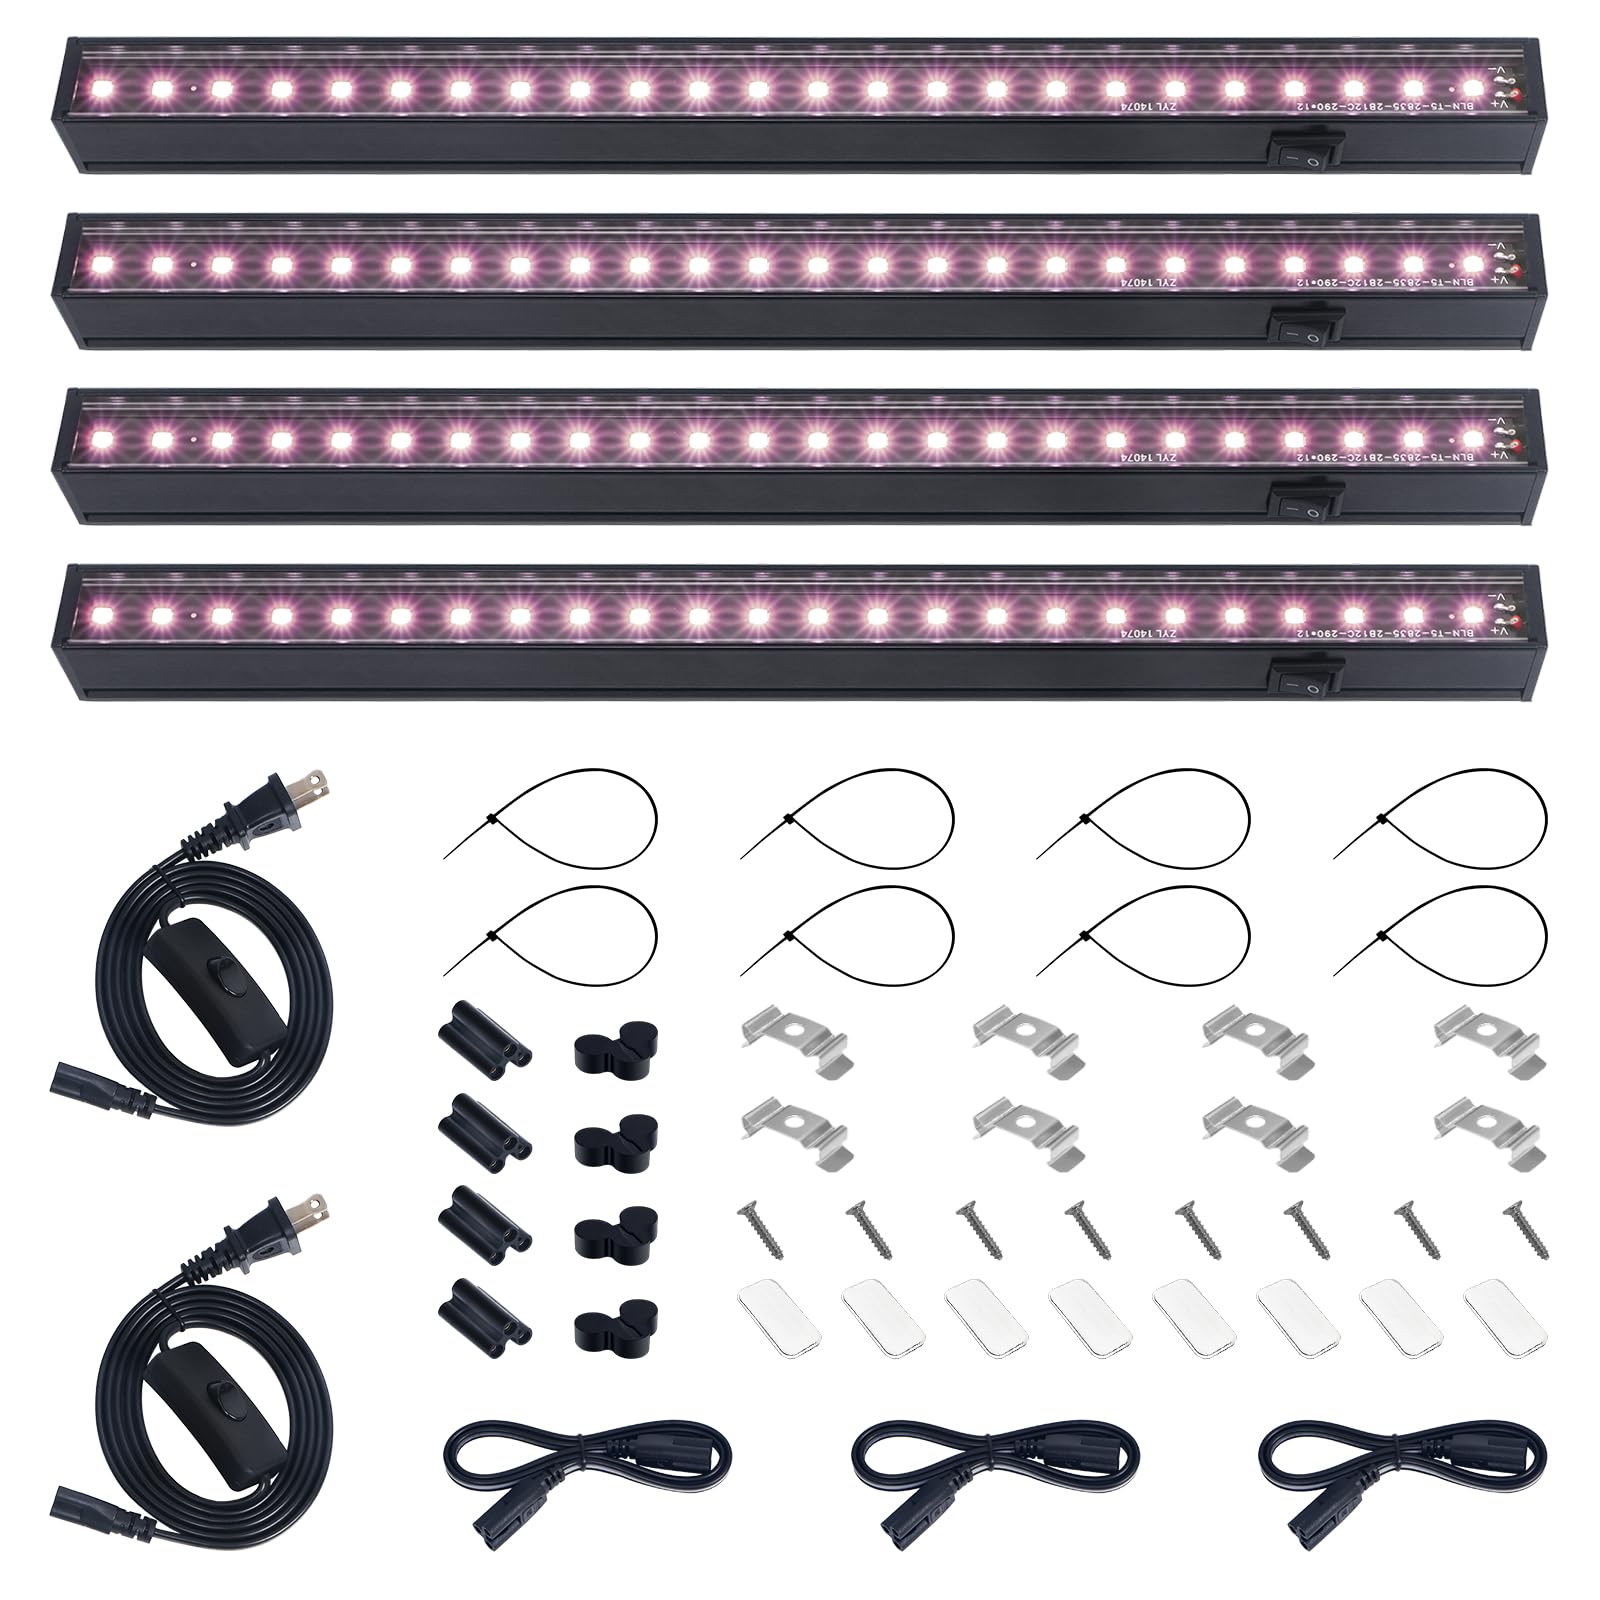 T5 Black LED Grow Light,1FT,5W,Pinkish White,Linkable and Magnetic,4 Packs,NC05(FB)